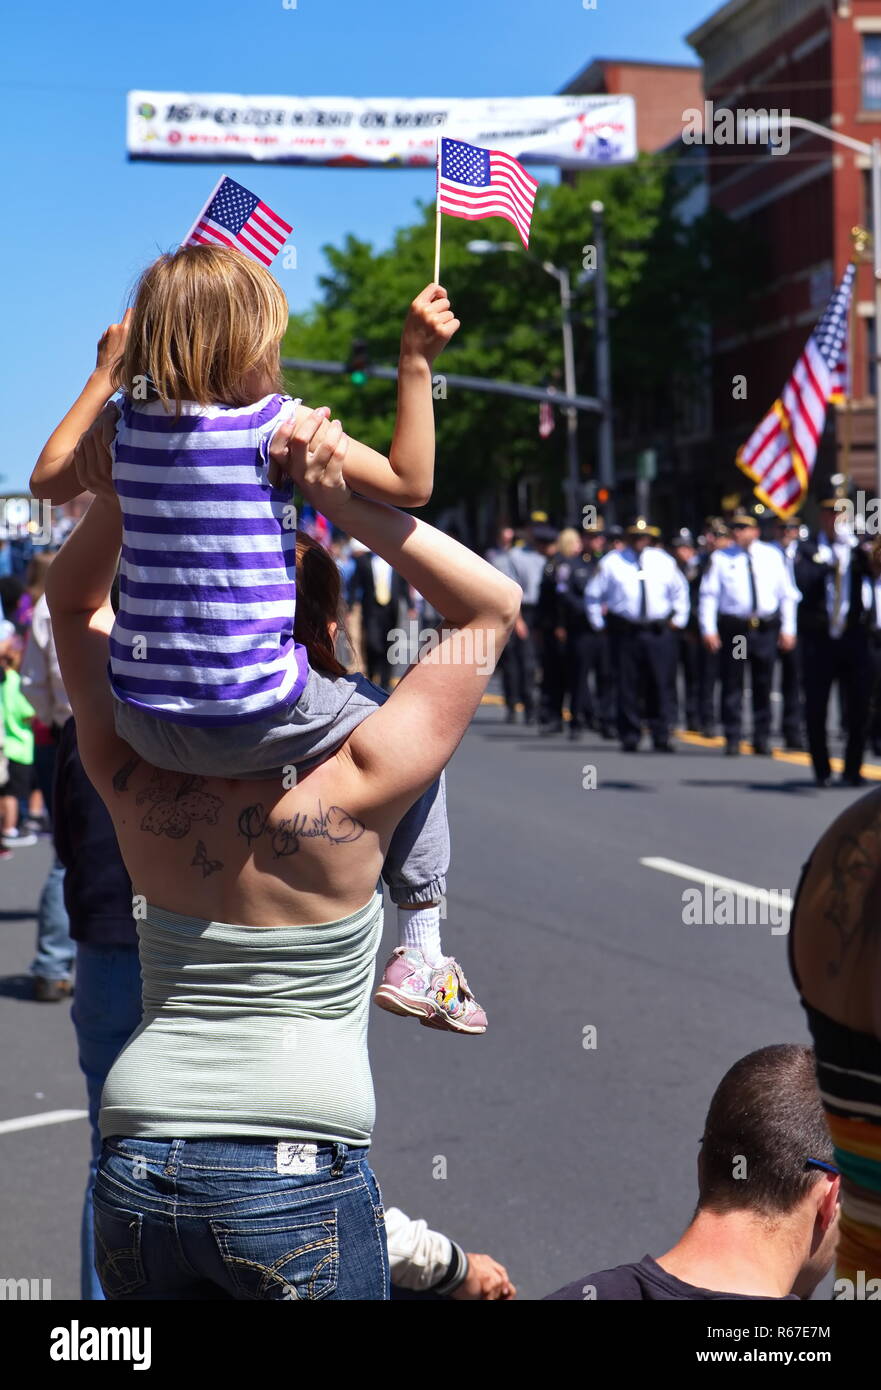 Middletown, CT USA. May 2018. Daughter sitting on mom`s shoulders waving flag during a Memorial Day celebration. Stock Photo